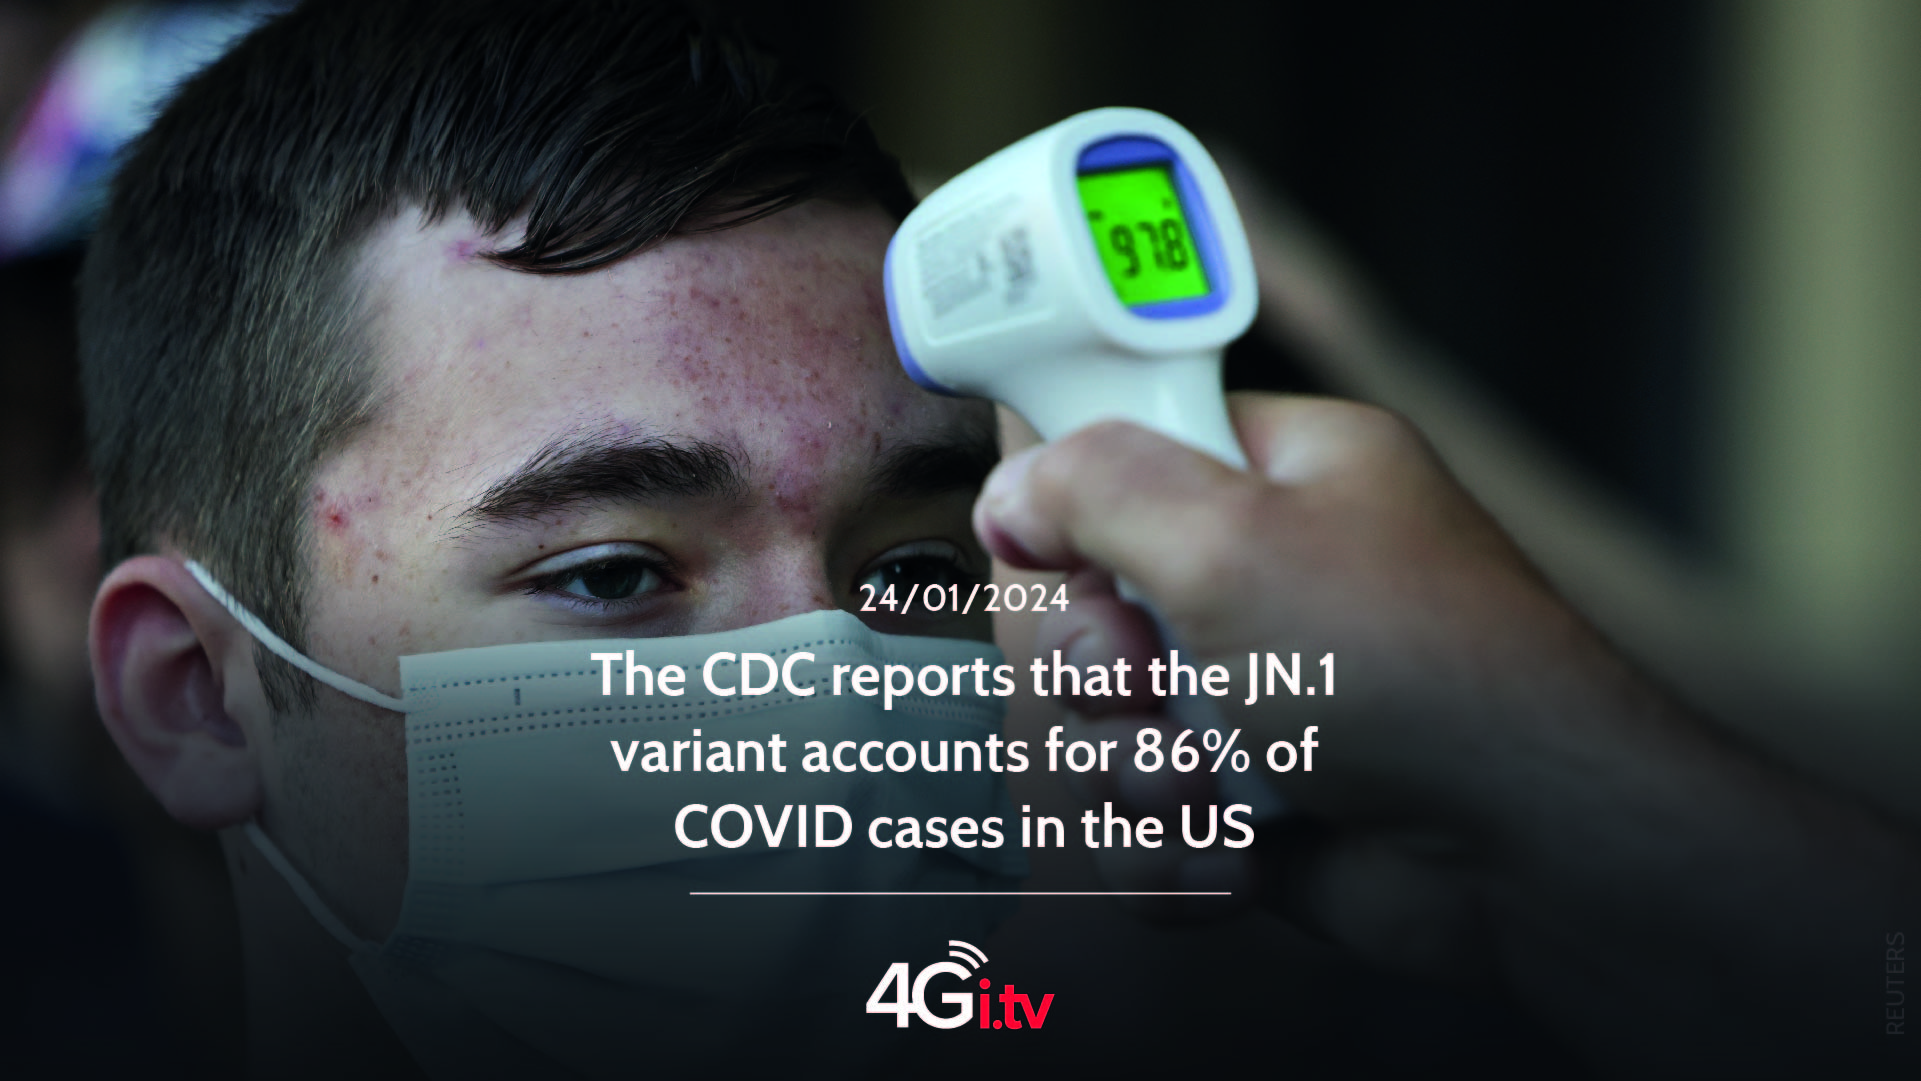 Lesen Sie mehr über den Artikel The CDC reports that the JN.1 variant accounts for 86% of COVID cases in the US